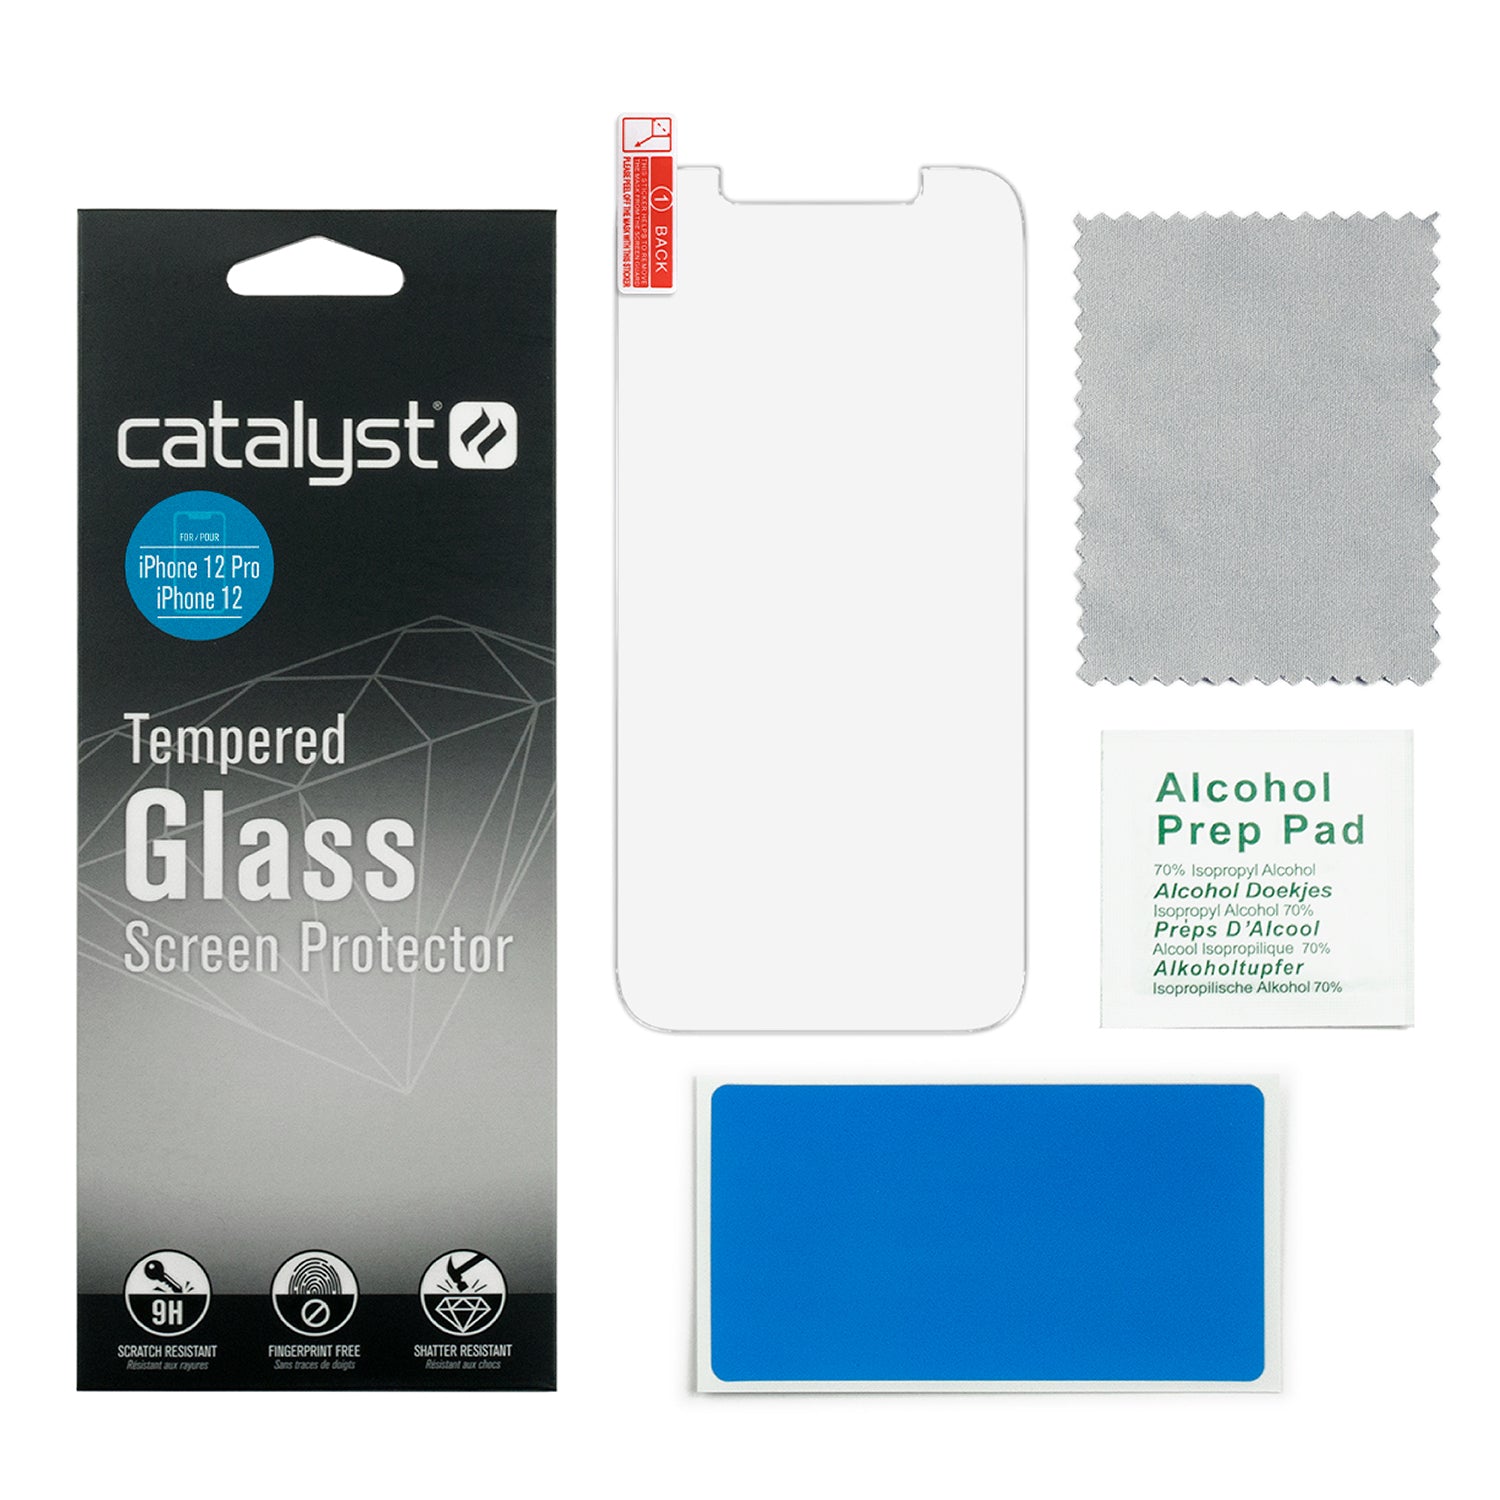 Catalyst Tempered Glass Screen Protector for iphone 12 and iphone 12 pro inside the box includes packaging screen protector cleaning cloth alcohol wipe dust removal sticker text reads packaging screen protector cleaning cloth alcohol wipe dust removal sticker alcohol prep pad